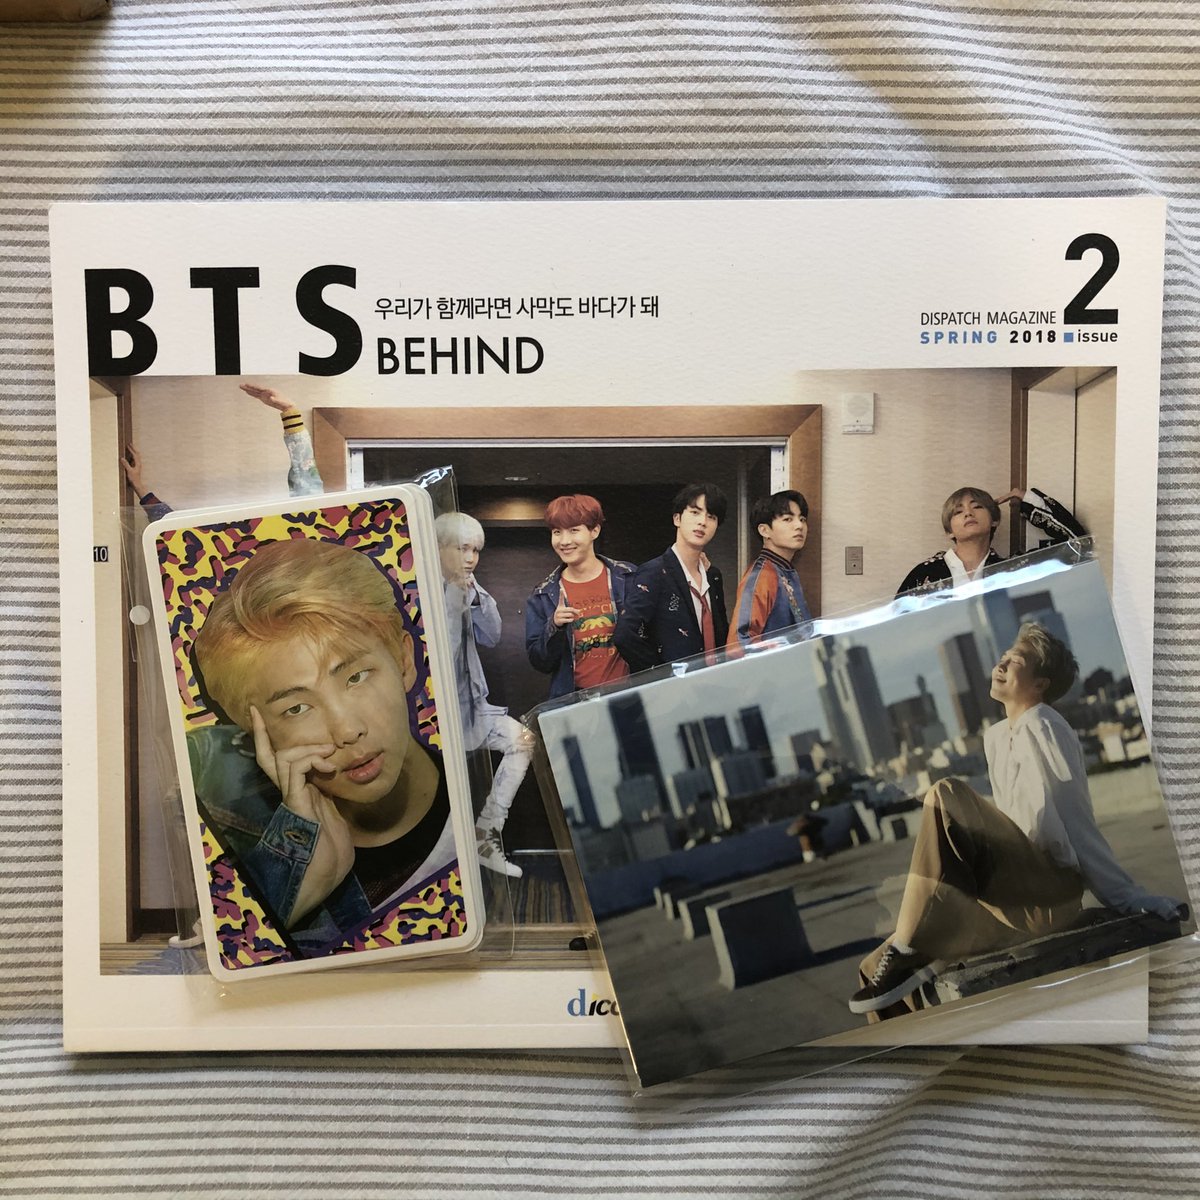 BTS dispatch magazine, spring 2018! like new, sans packaging. comes with the exclusive pcs and postcards (each member)! $50, but willing to negotiate!